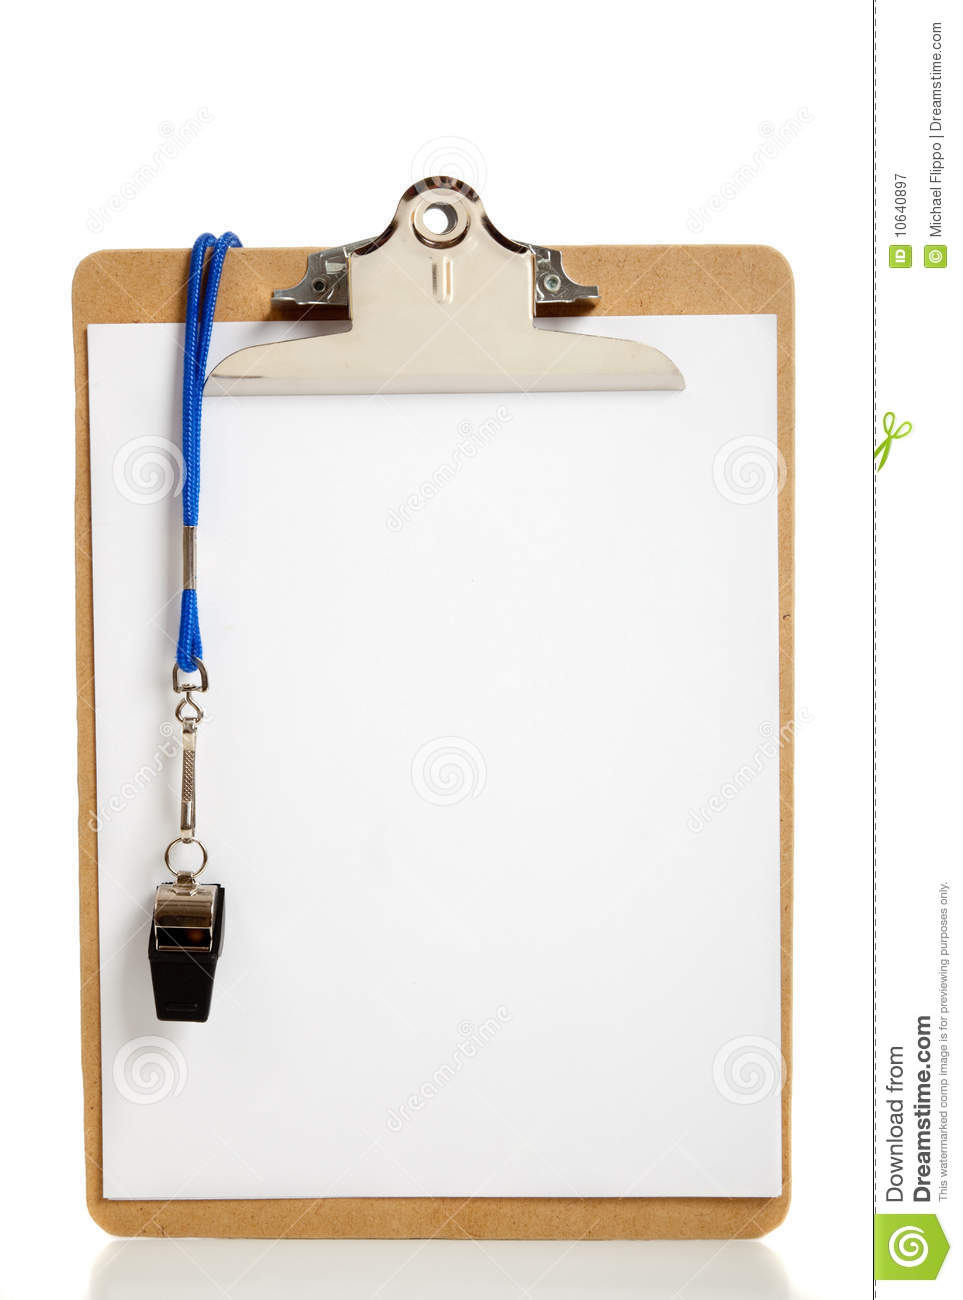 Blank Clipboard And Coaches Whistle Royalty Free Stock Photography